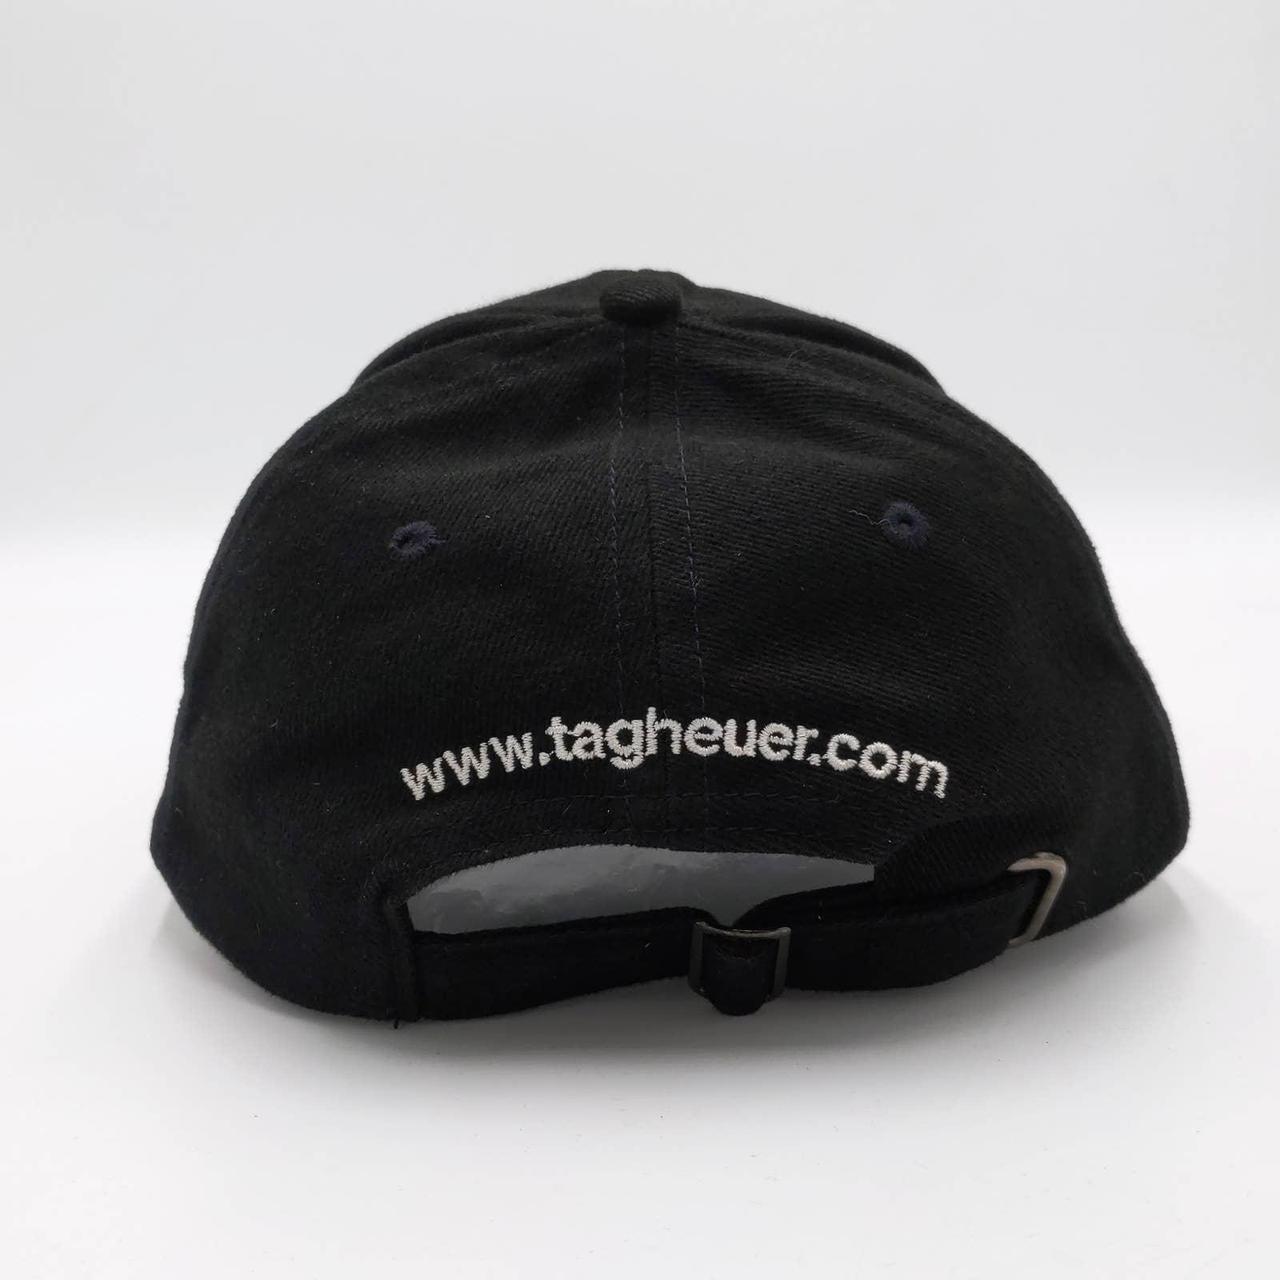 Product Image 3 - TAG Heuer Luxury Watches Hat
Color: